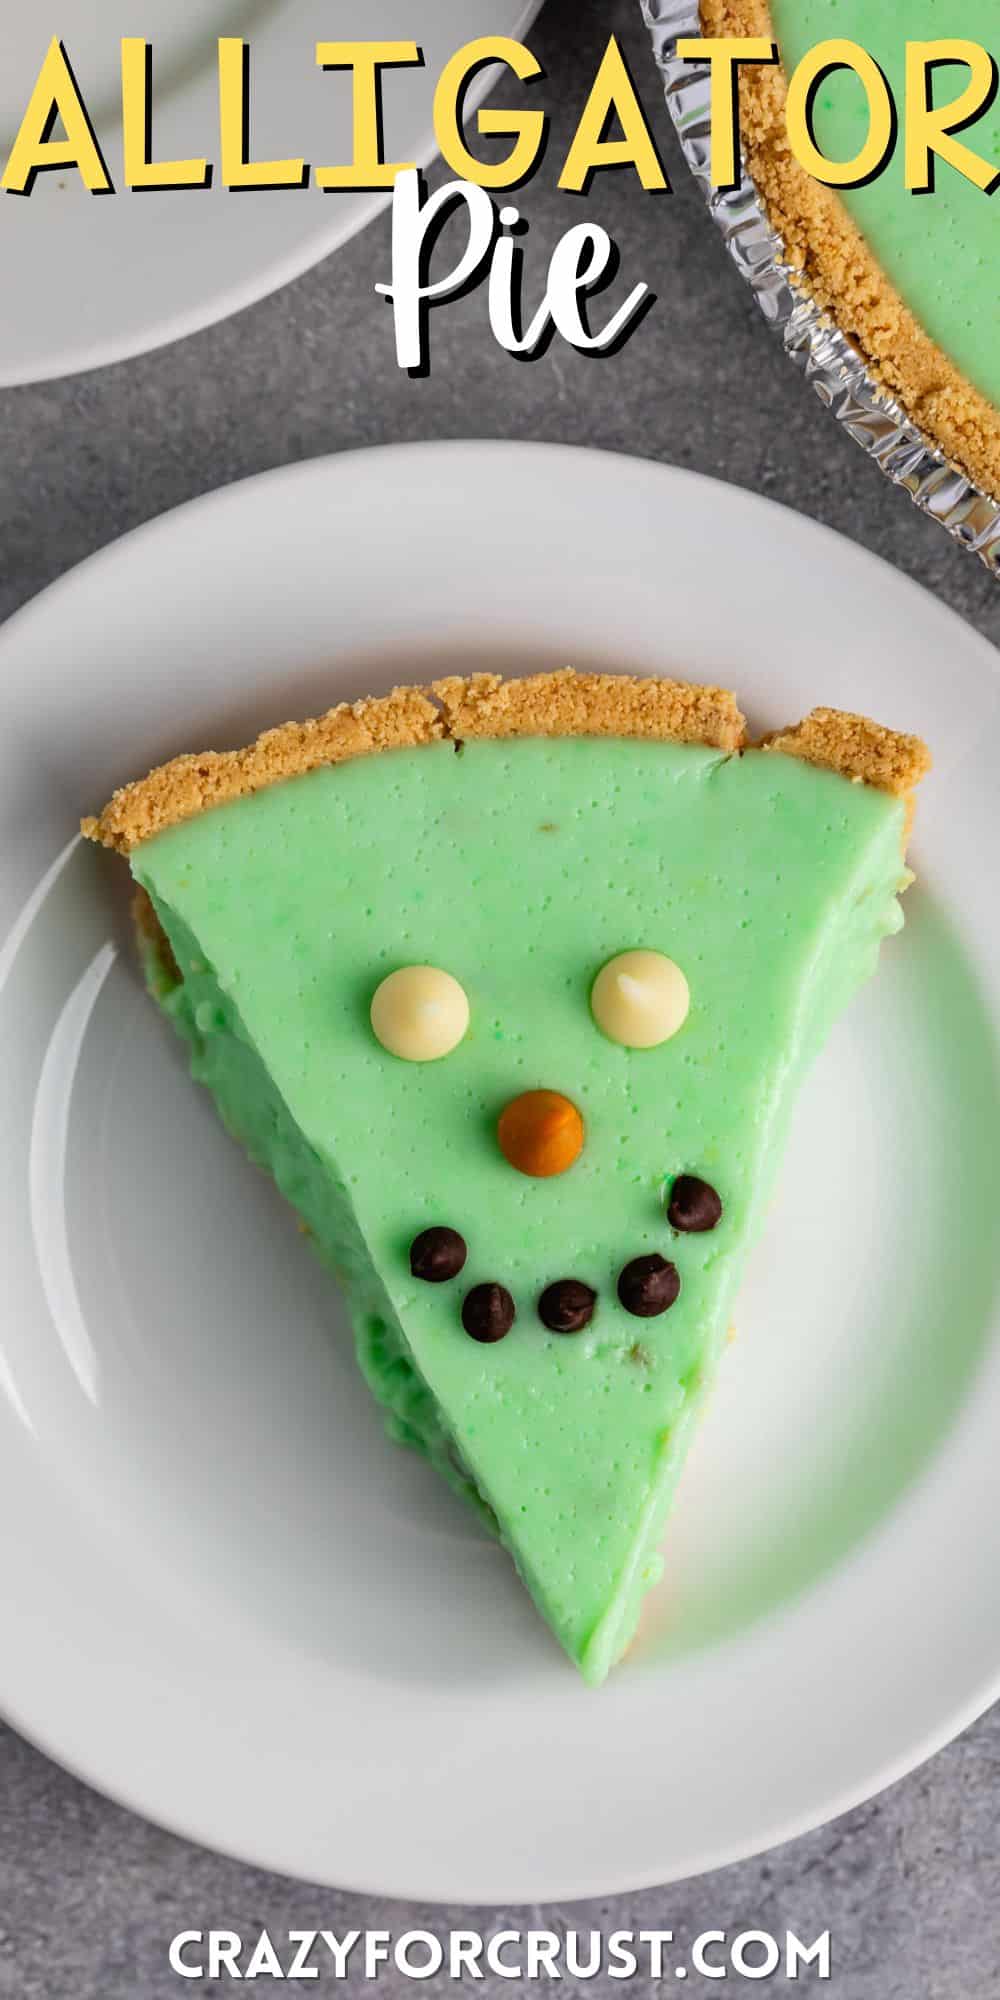 green alligator pie with chocolate chips on top making it a face on a white plate with words on the image.